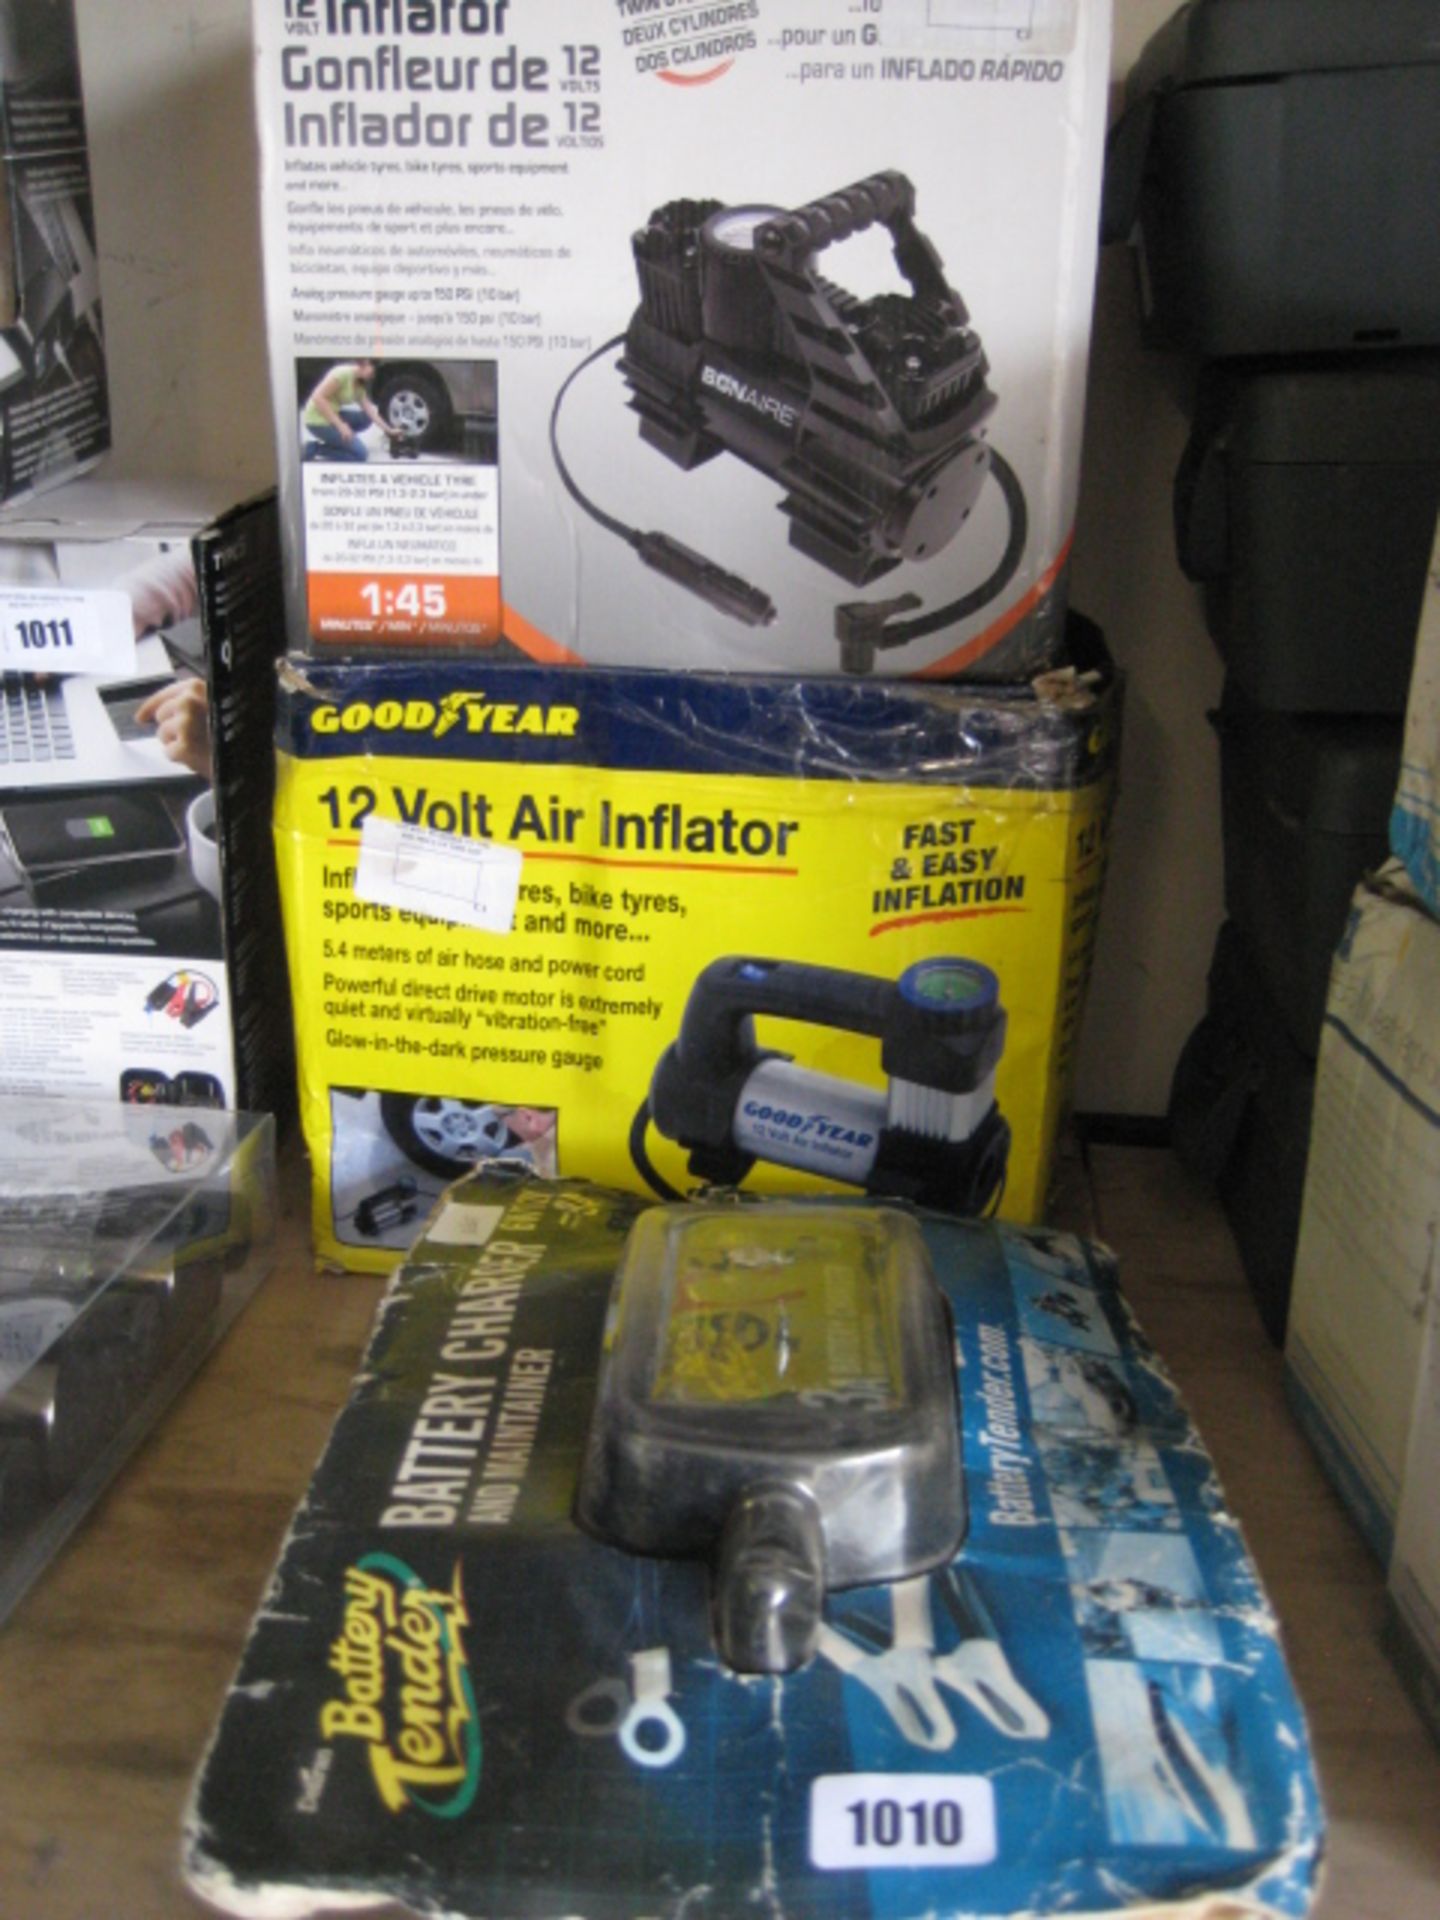 2 12v tyre inflator with Deltran battery charger and maintainer